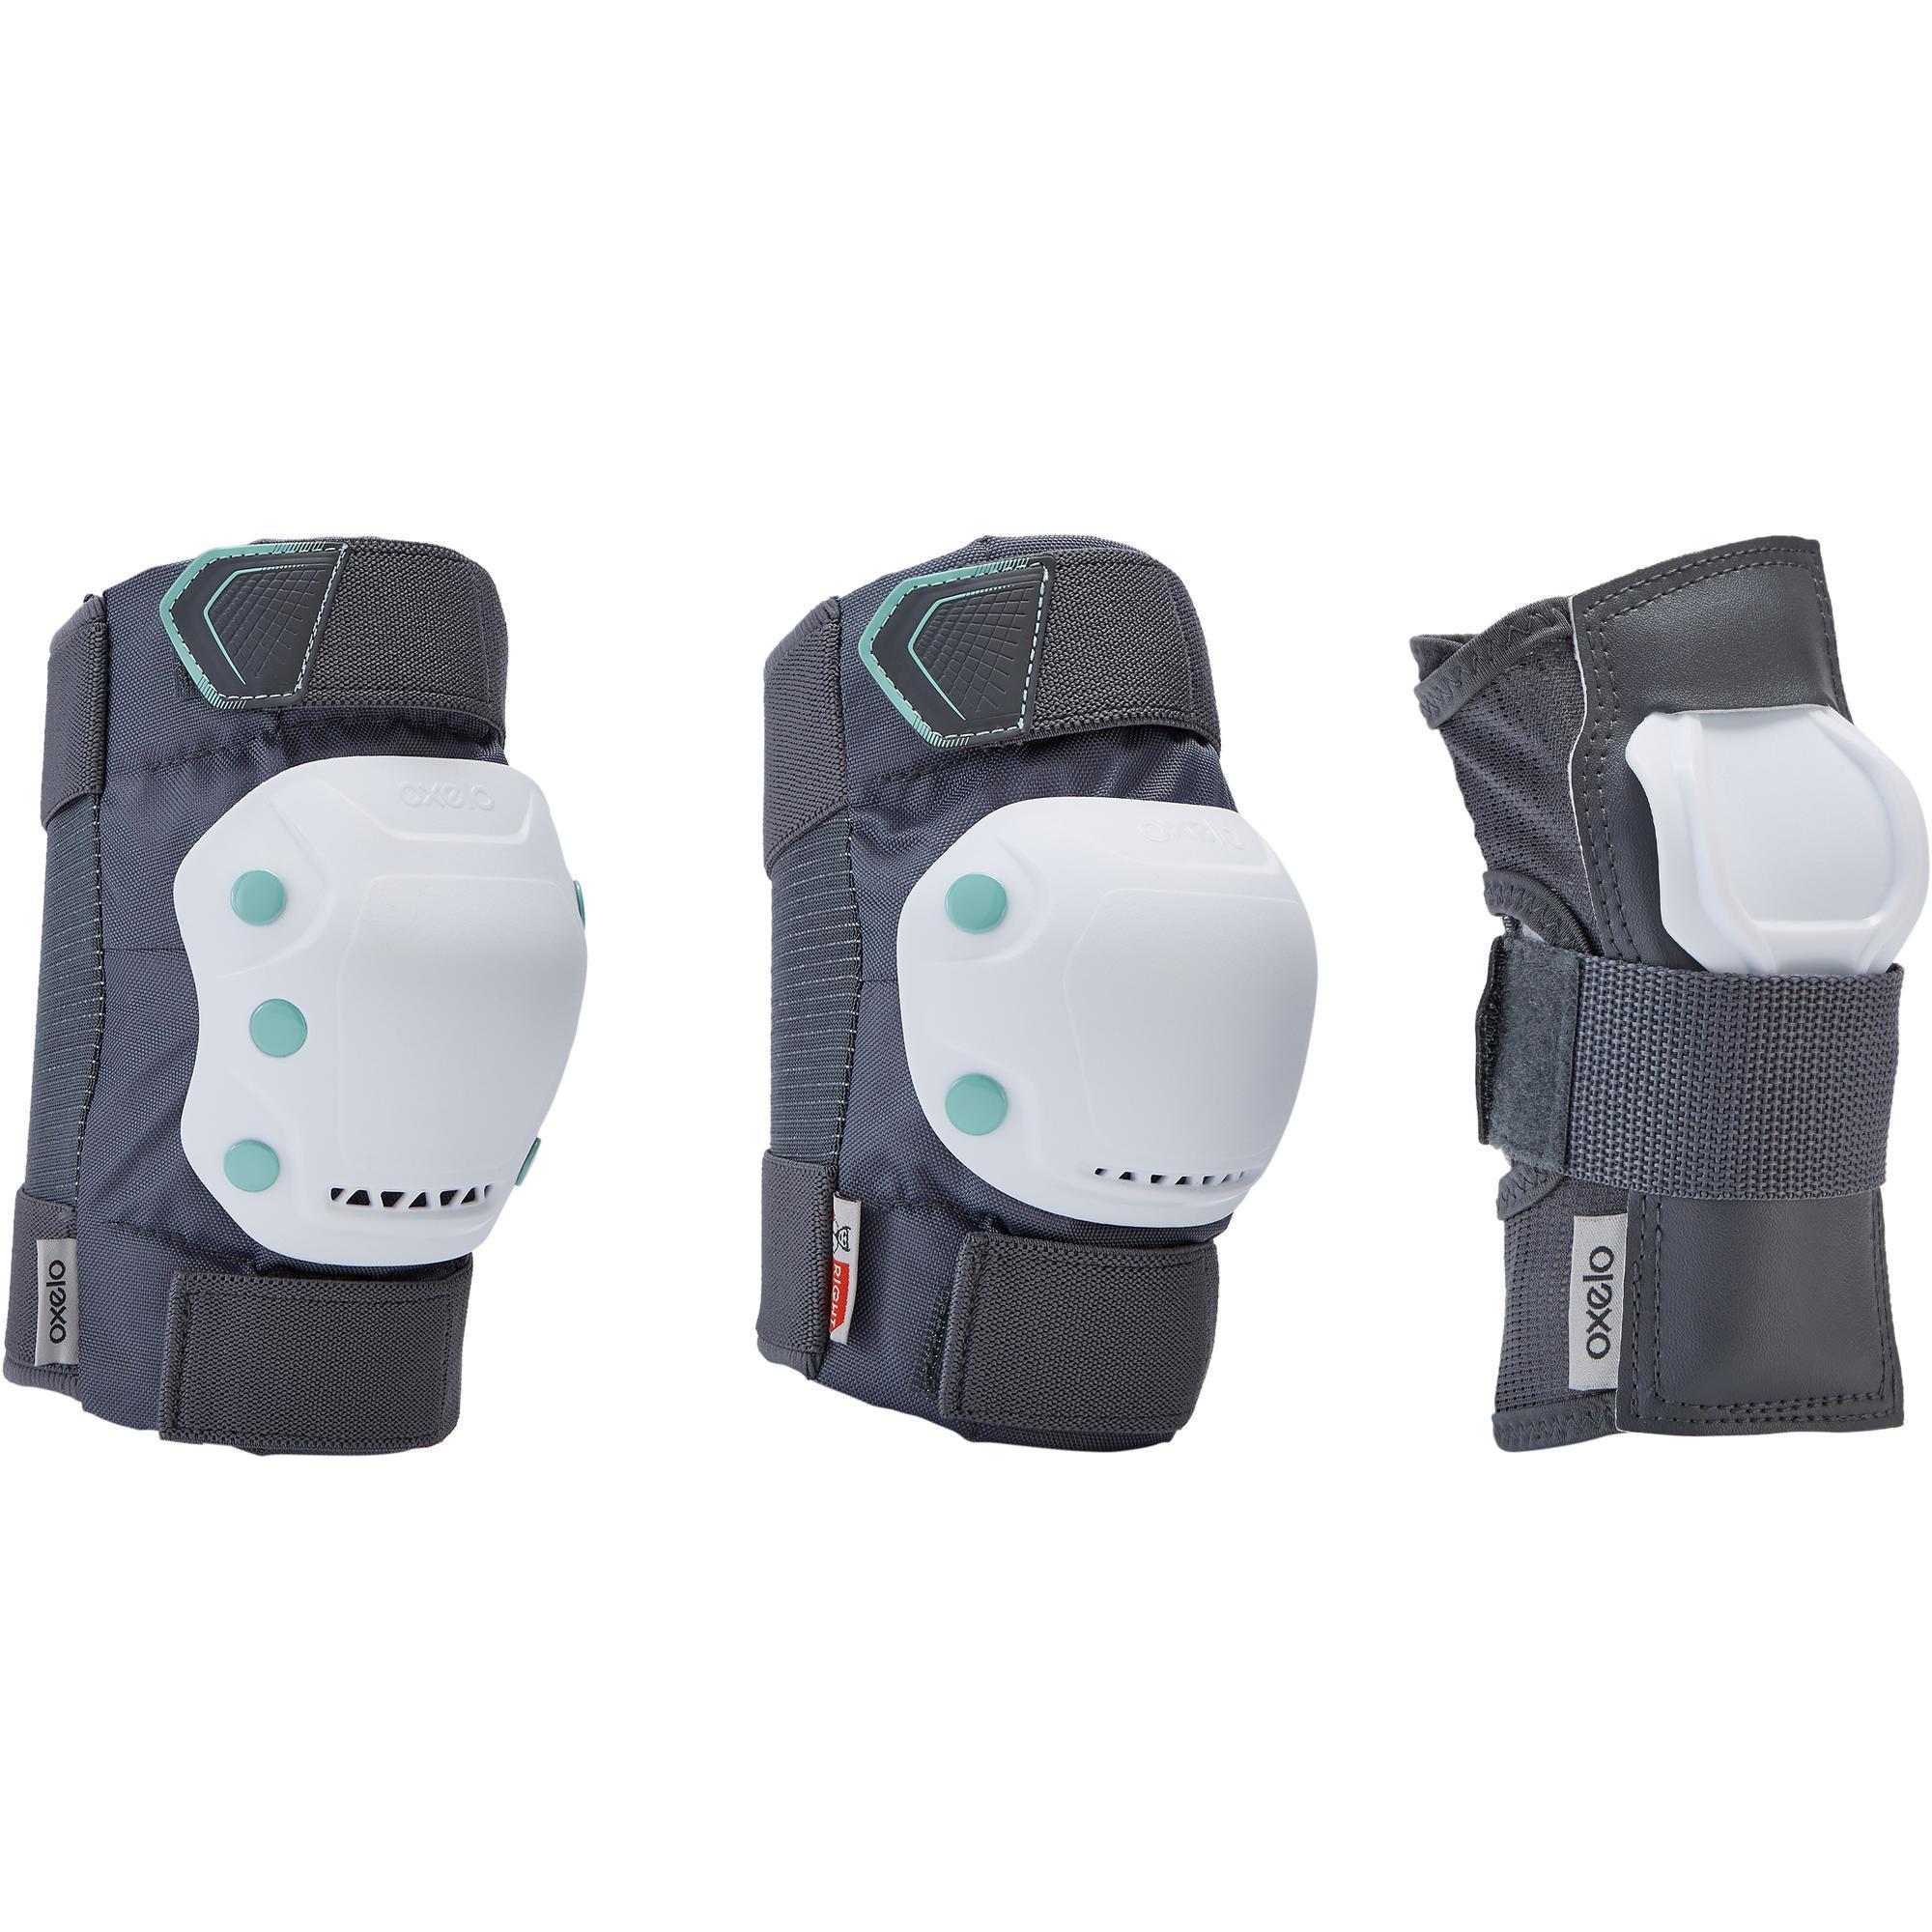 Bicycle Rayhome Sports Protective Gear Skating Knee Elbow Support Pads Set Outdoors Safety Protection for Scooter Rollerblades Skateboard 